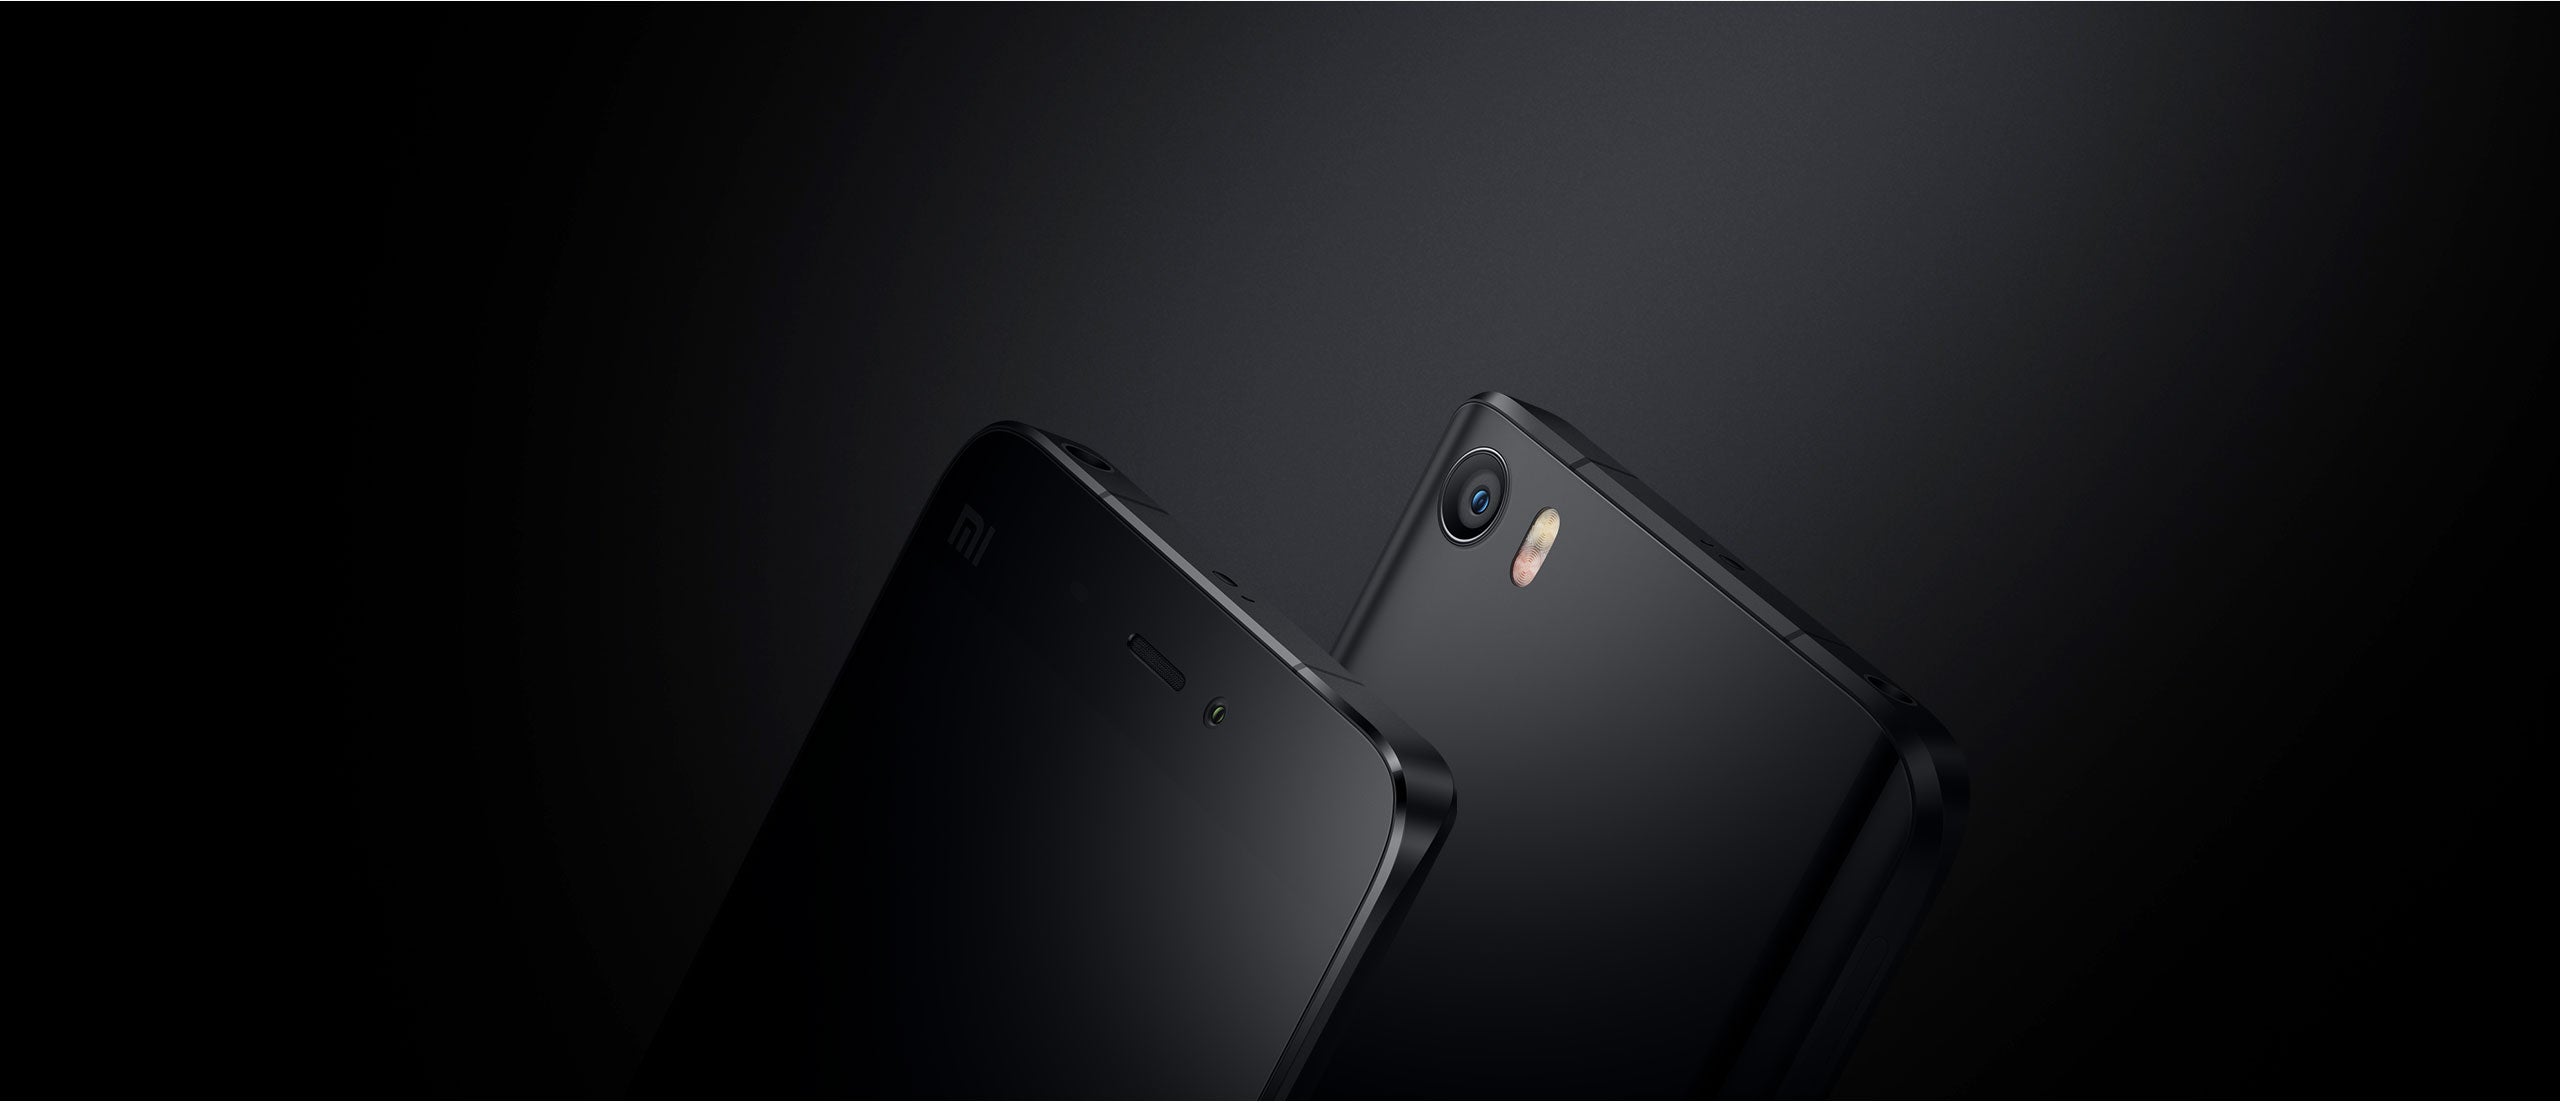 With a new Sony camera sensor, 4-axis image stabilization, and DTI pixel-to-pixel isolation, the Mi 5's 16MP camera is full of potential. - Xiaomi Mi 5 specs review: coming of age